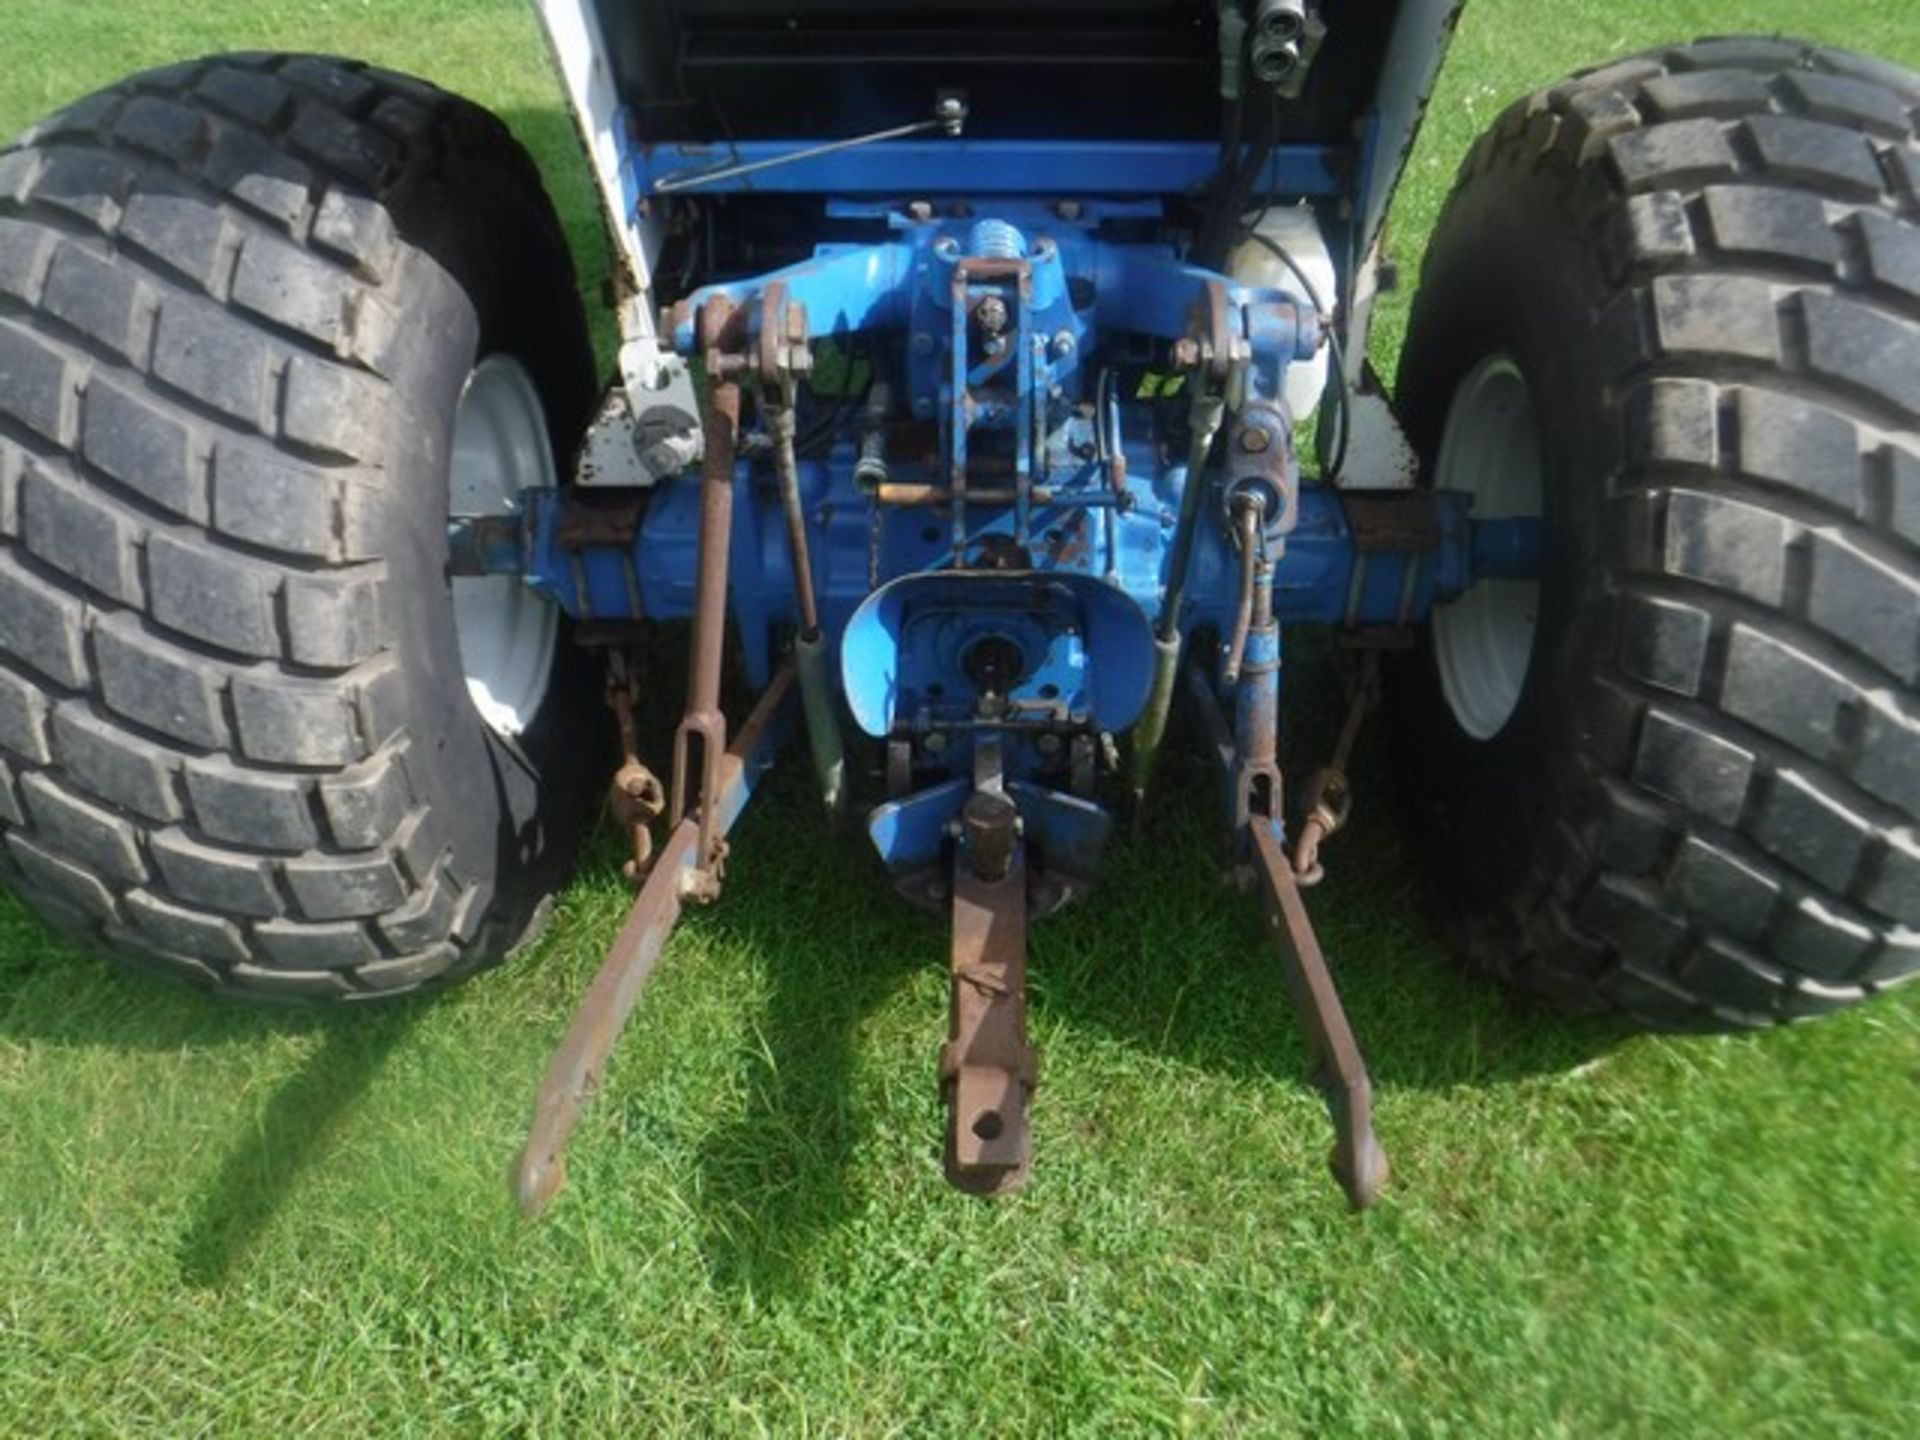 FORD 2120 4WD TRACTOR 1992 - 5917HRS (NOT VERIFIED) - Image 7 of 13